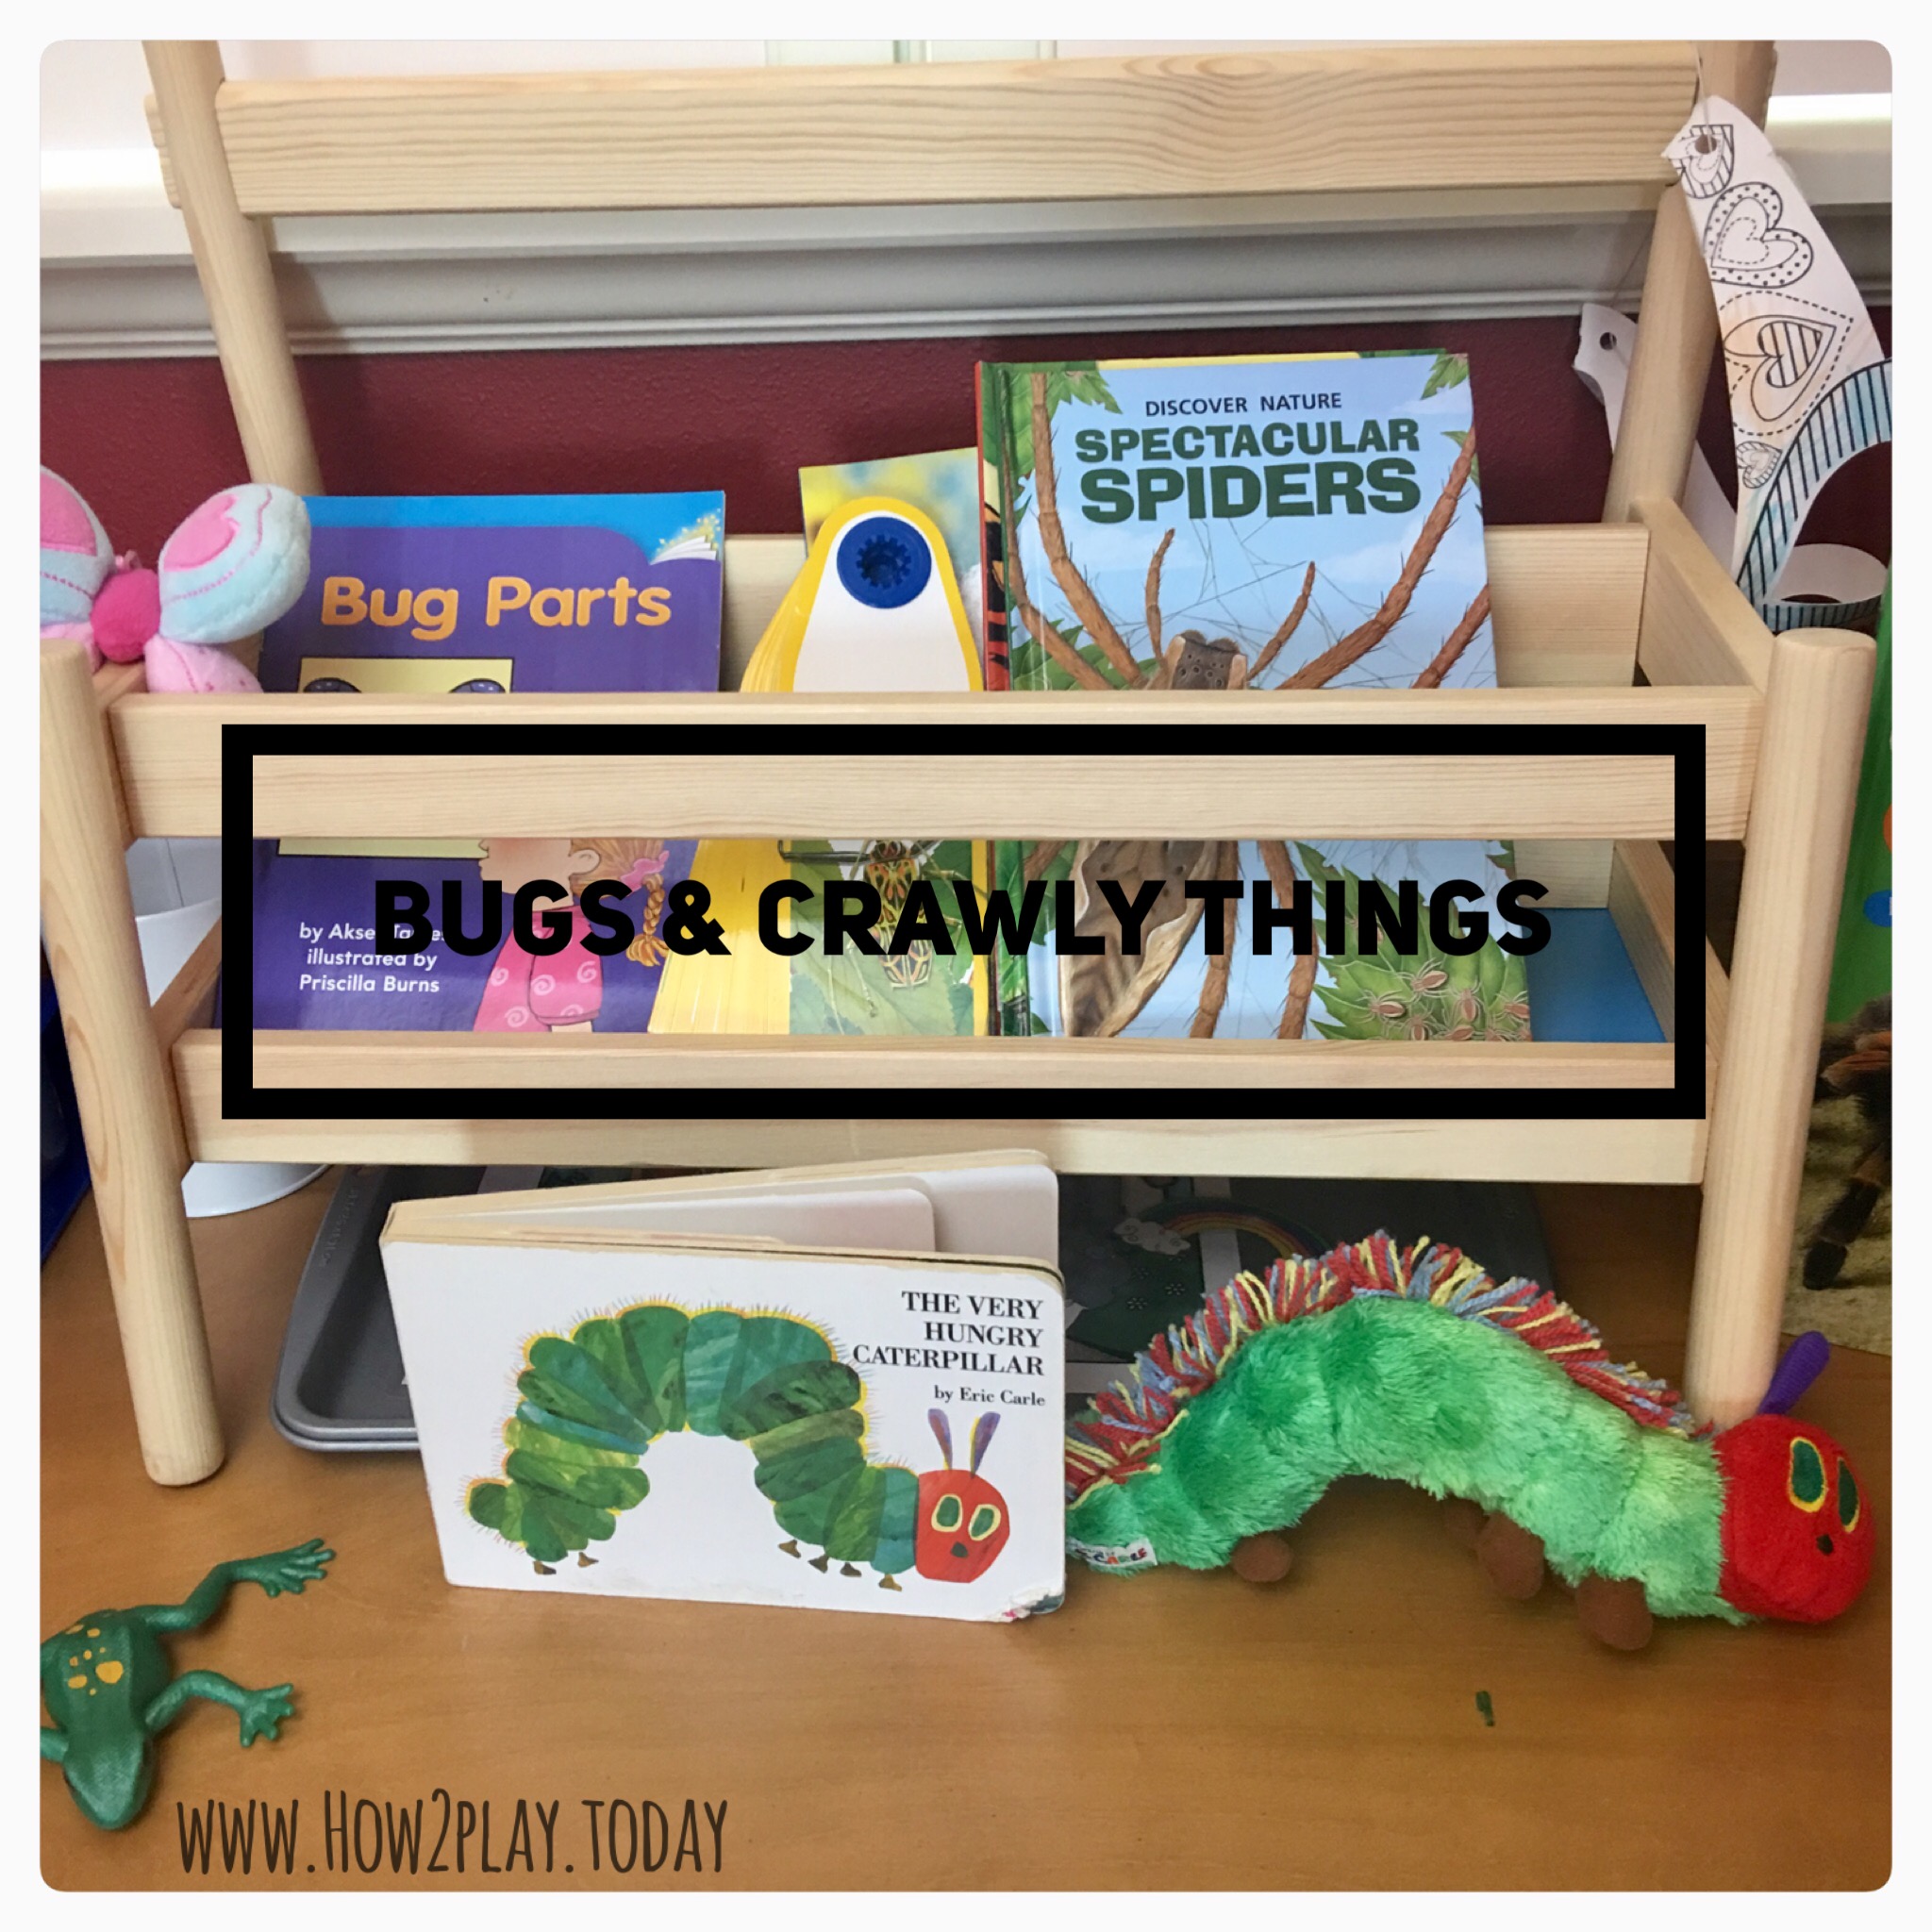 Science Center is all ready filled with books about bugs for our Bugs & Crawly Things curriculum.